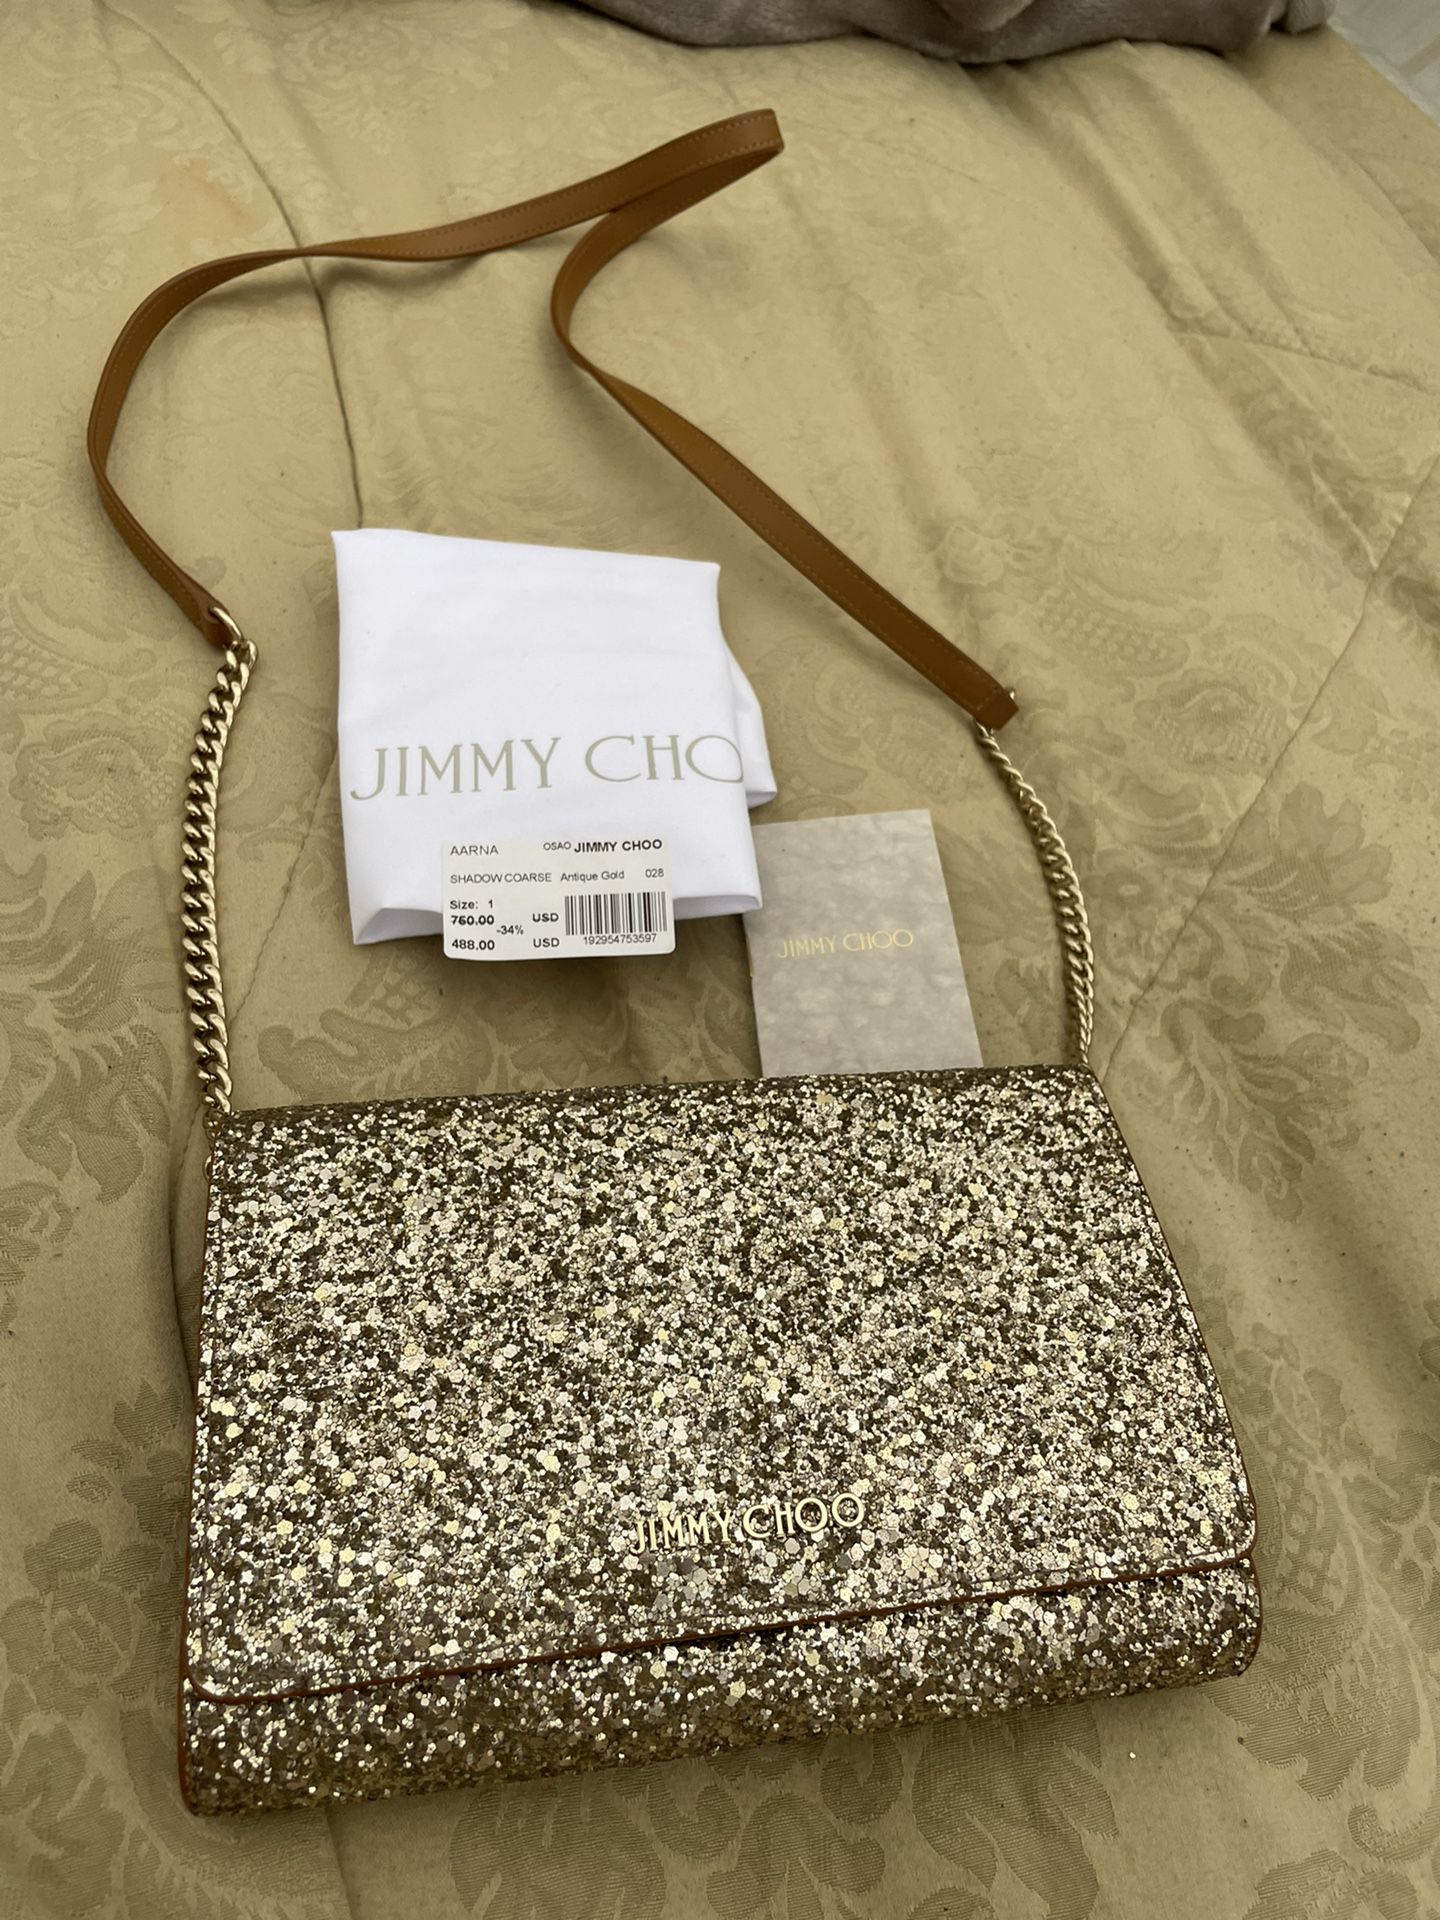 Sling Purse Jimmy Choo Collection Authentic , Real Not Fake 